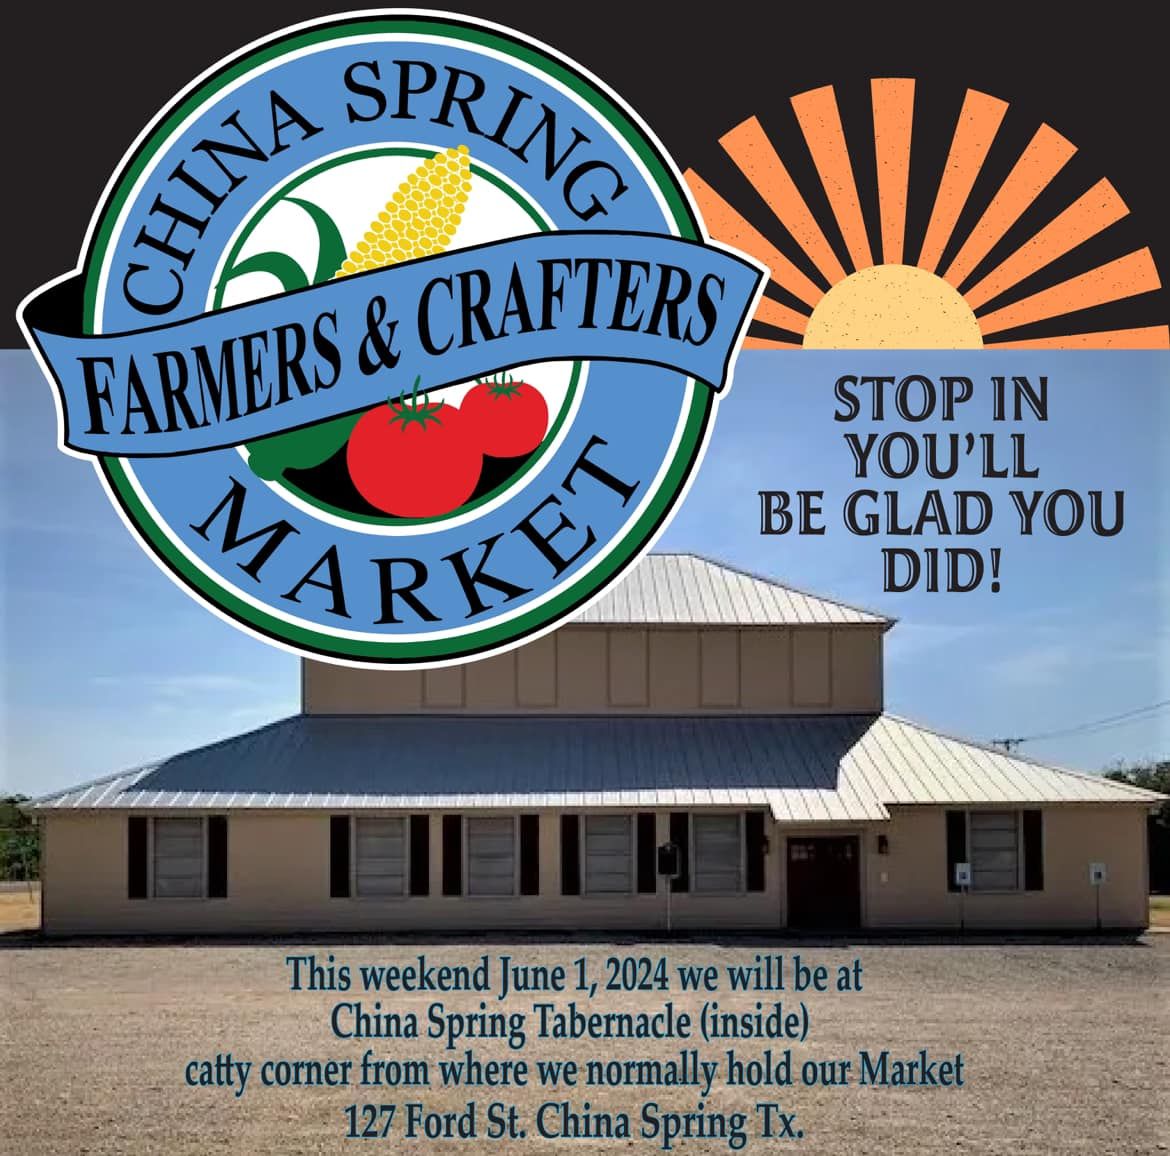 CHINA SPRING FARMERS AND CRAFTERS MARKETS JULY 1st EVENT